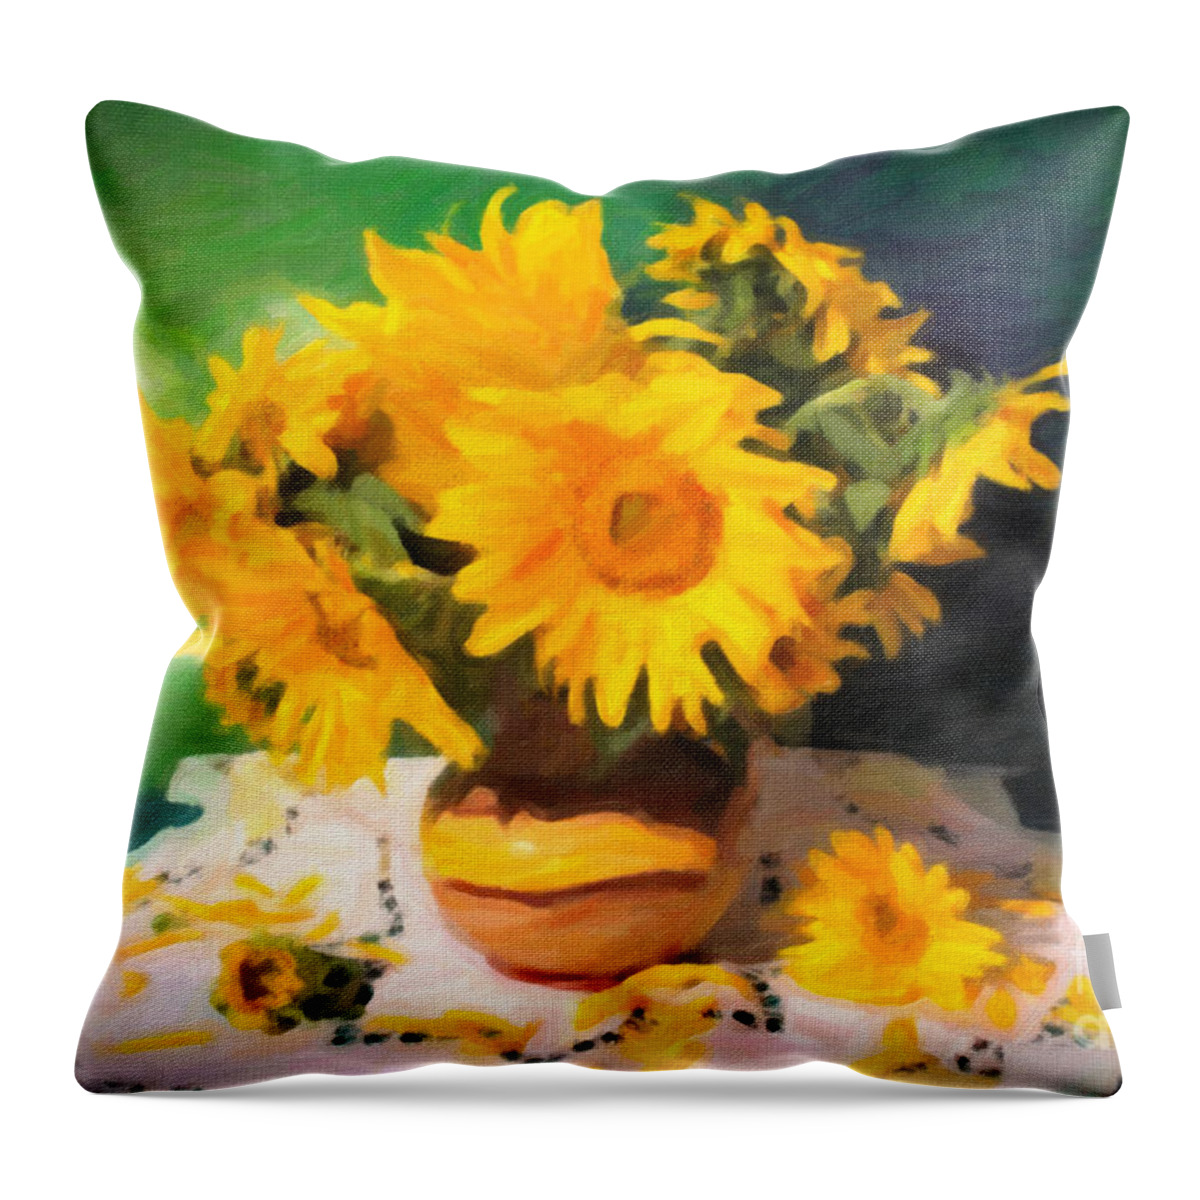 Sunflowers Throw Pillow featuring the painting Sunflowers Still Life Painting by Chris Armytage